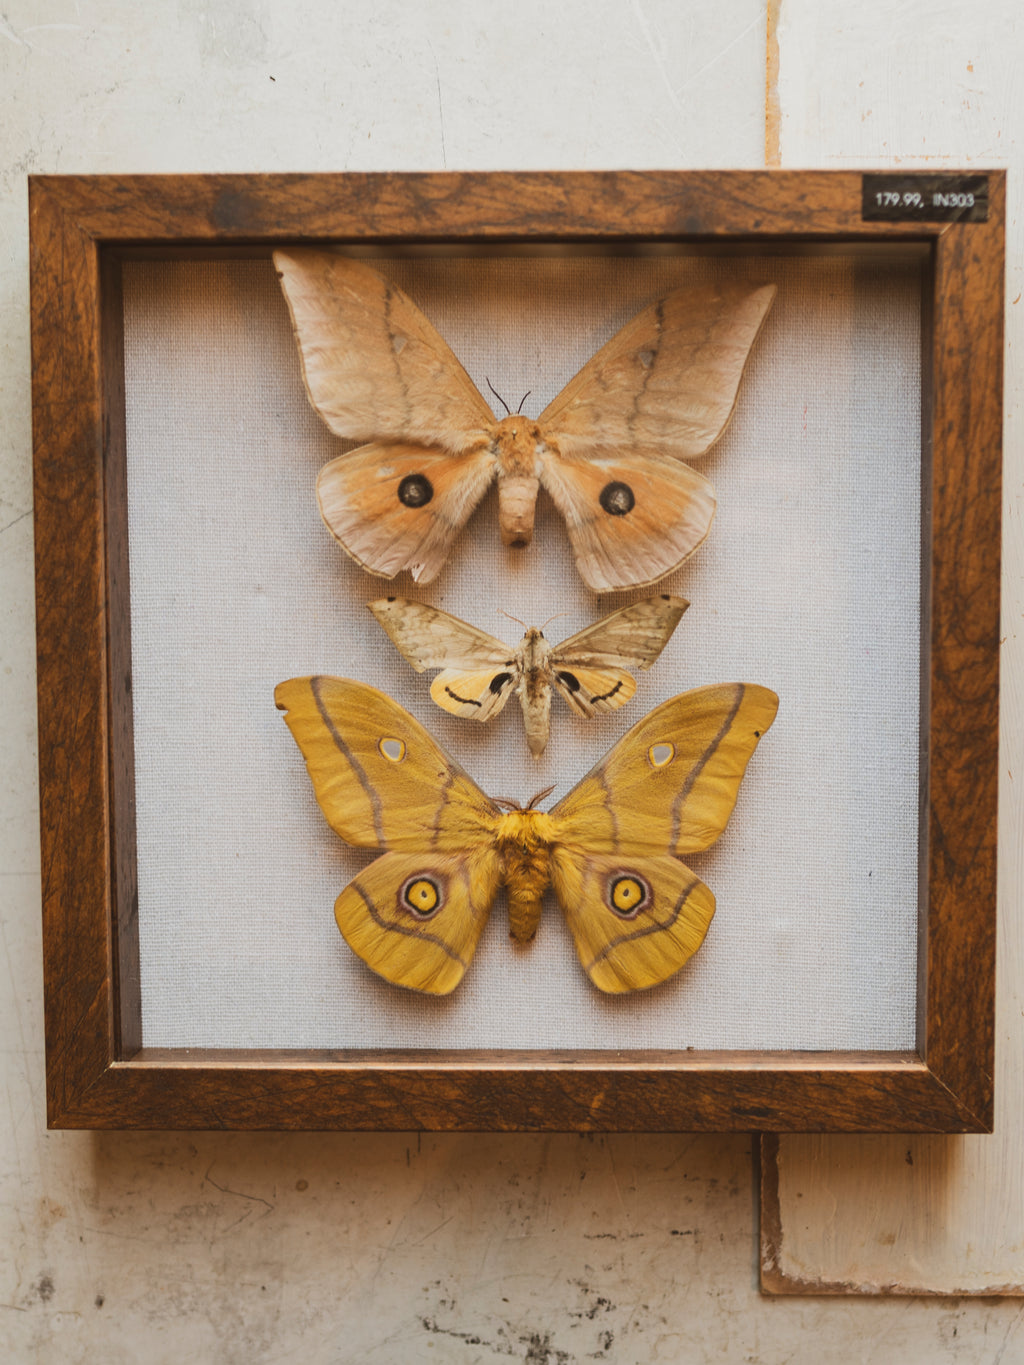 Framed Moth Collection, IN303